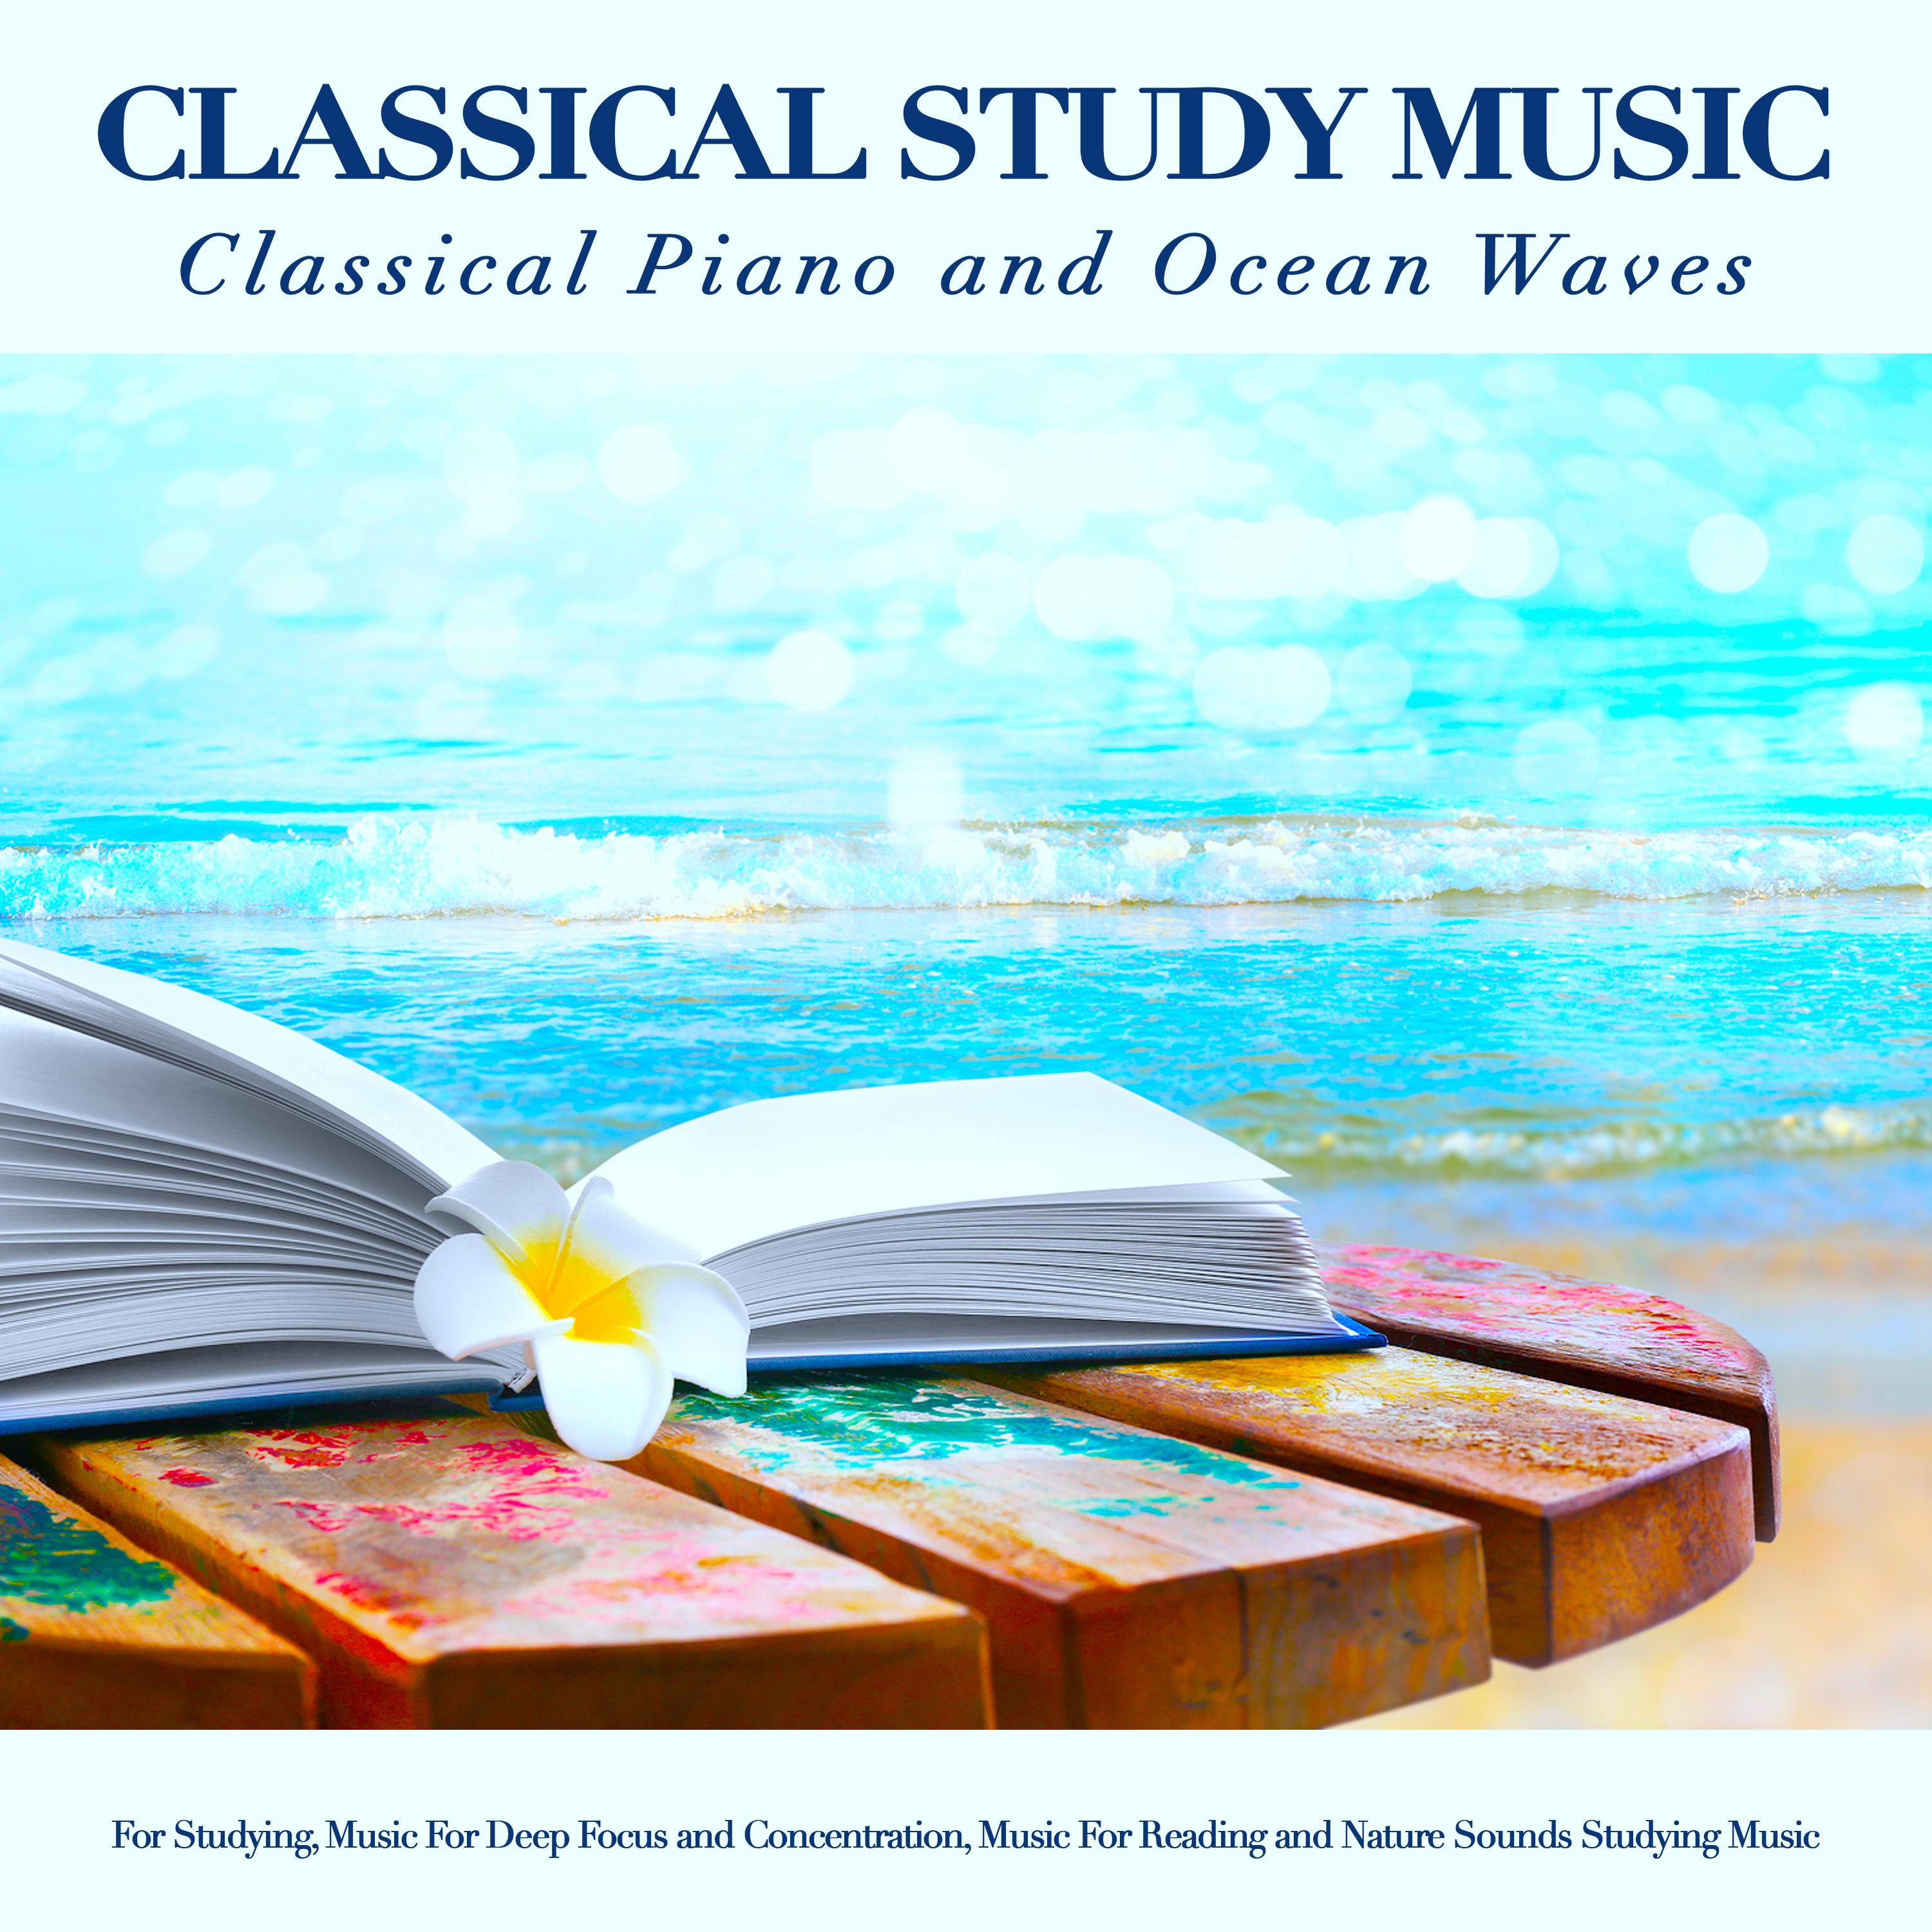 Tale Of Distant Lands - Schumann - Classical Study Music - Ocean Waves Sounds - Classical Piano for Studying